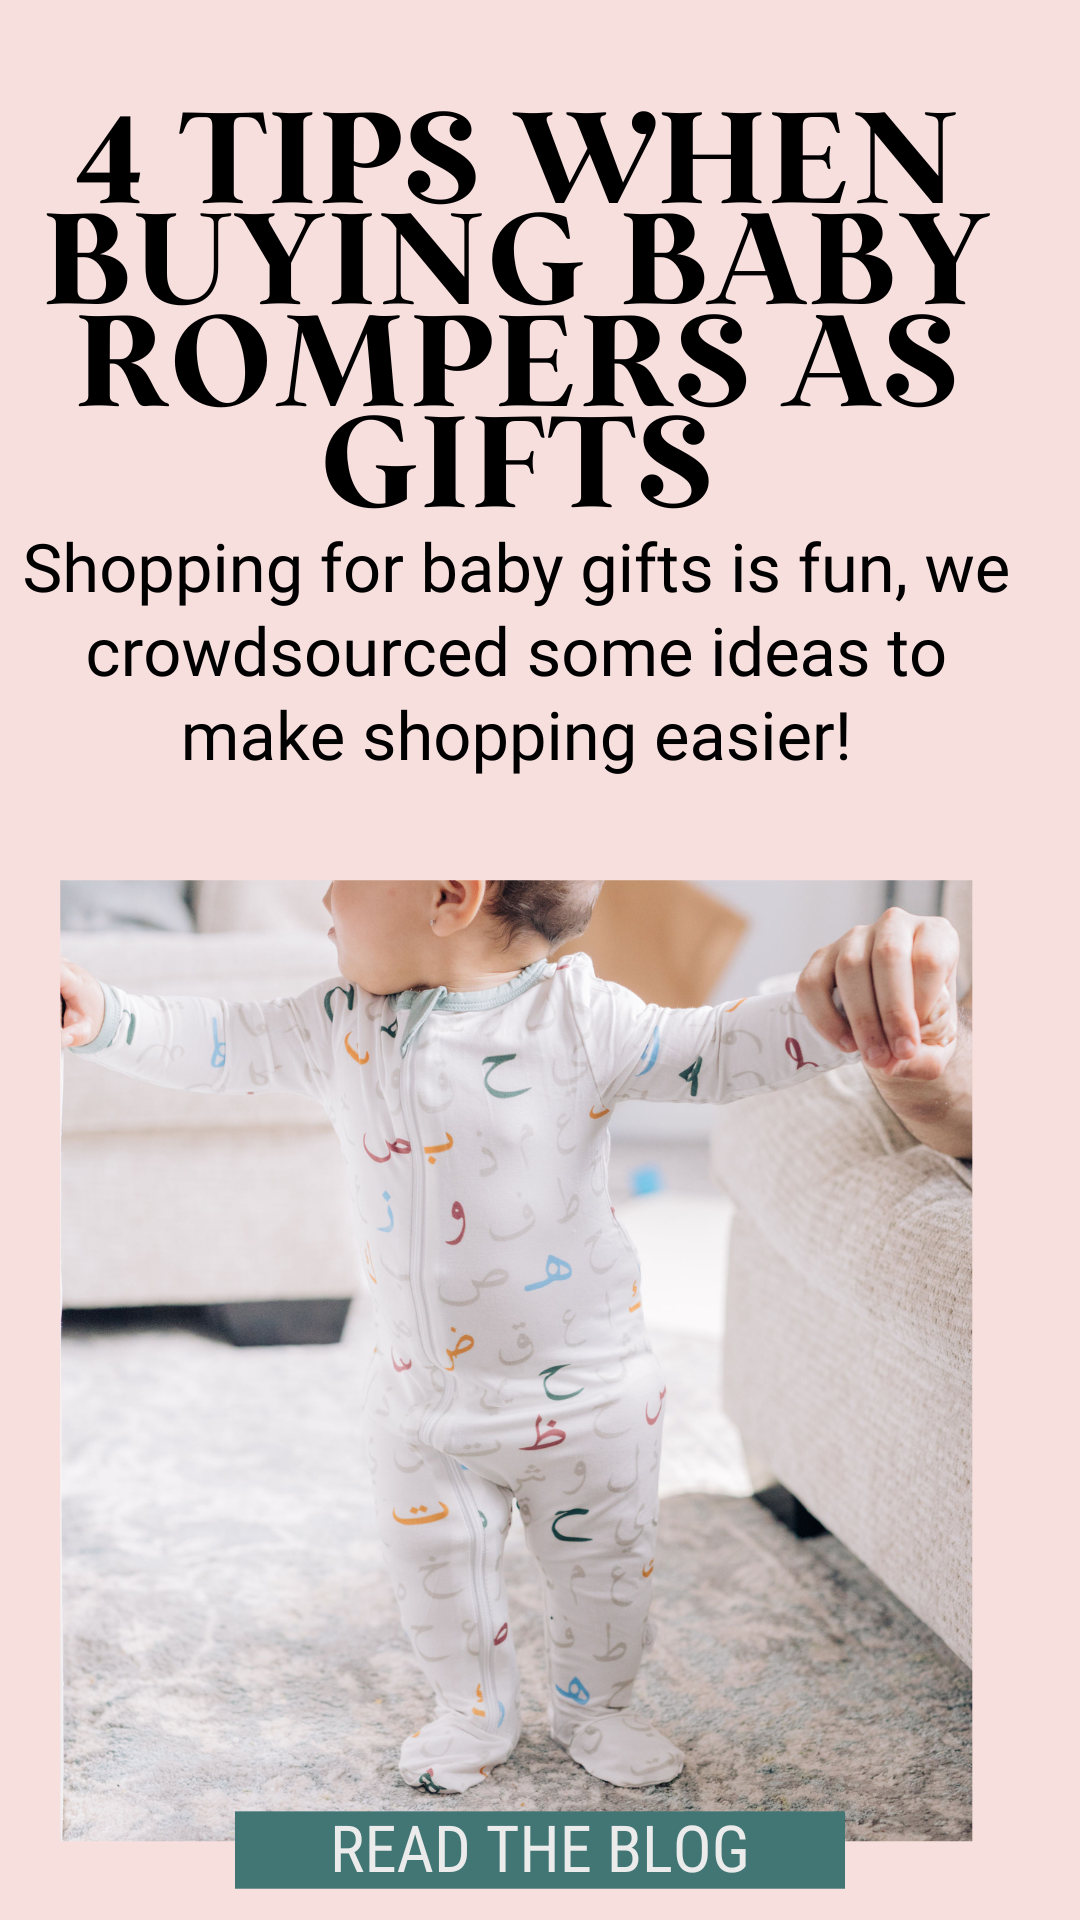 Four Tips for Buying Baby Rompers as Gifts